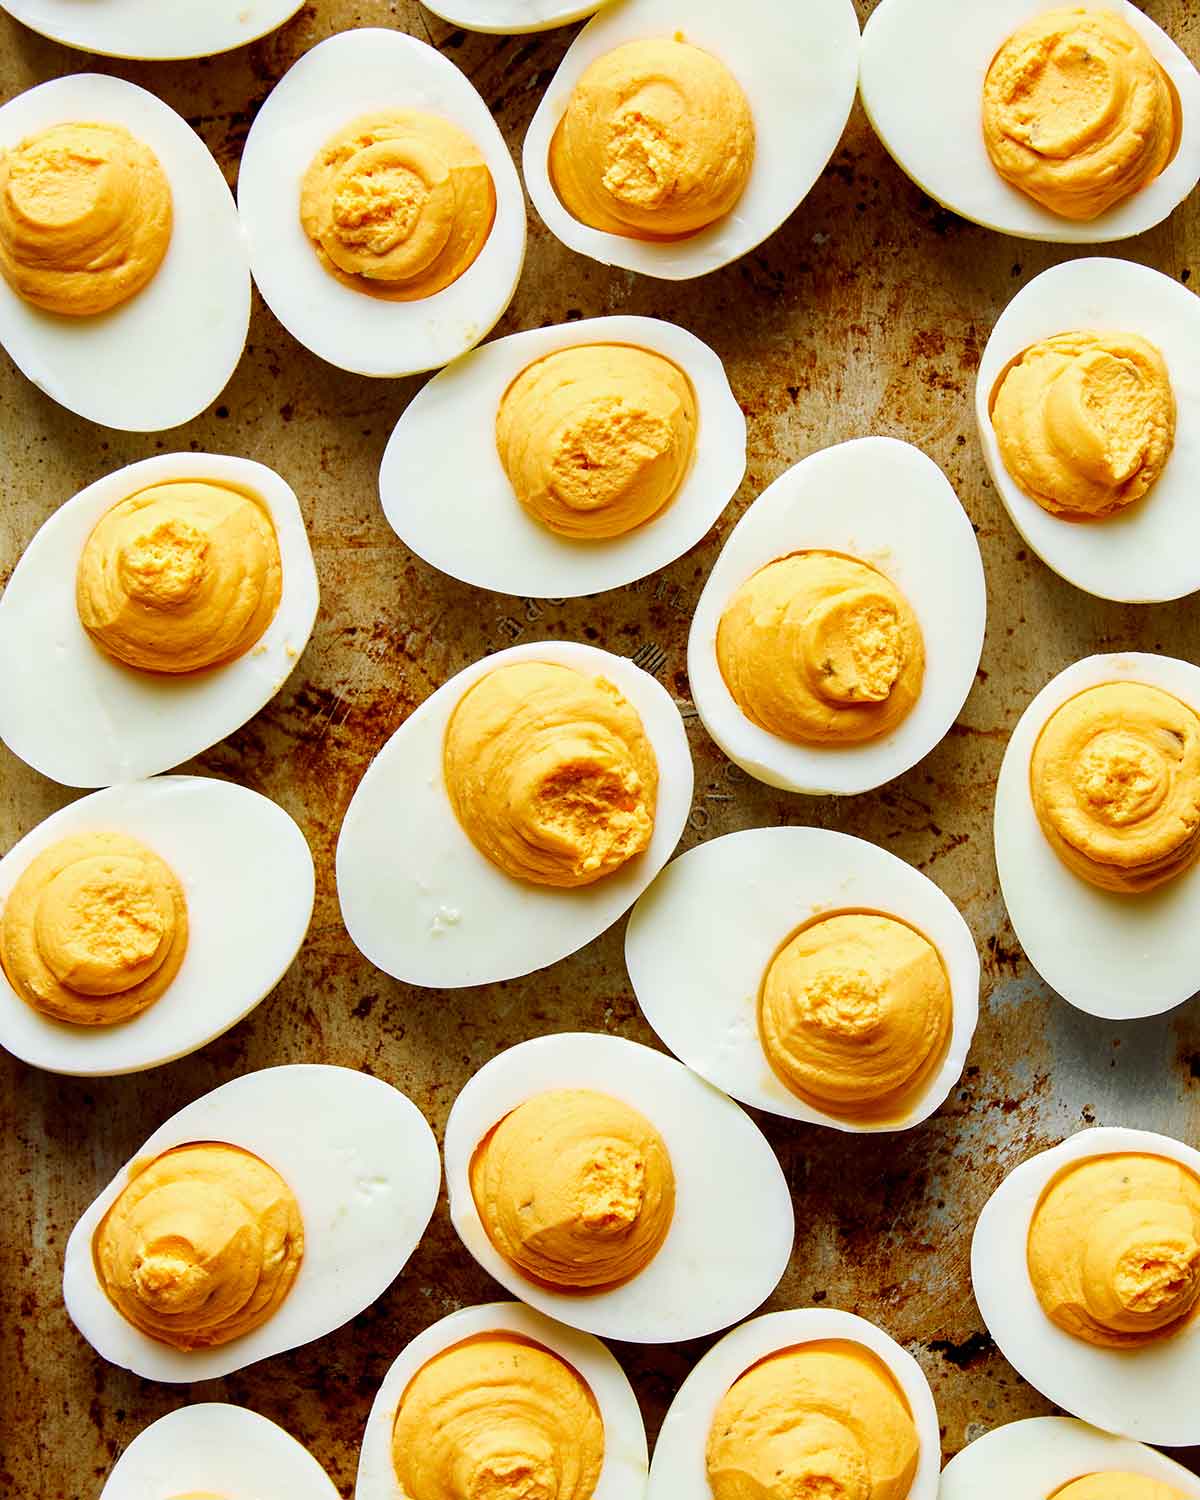 A tray of made deviled eggs.